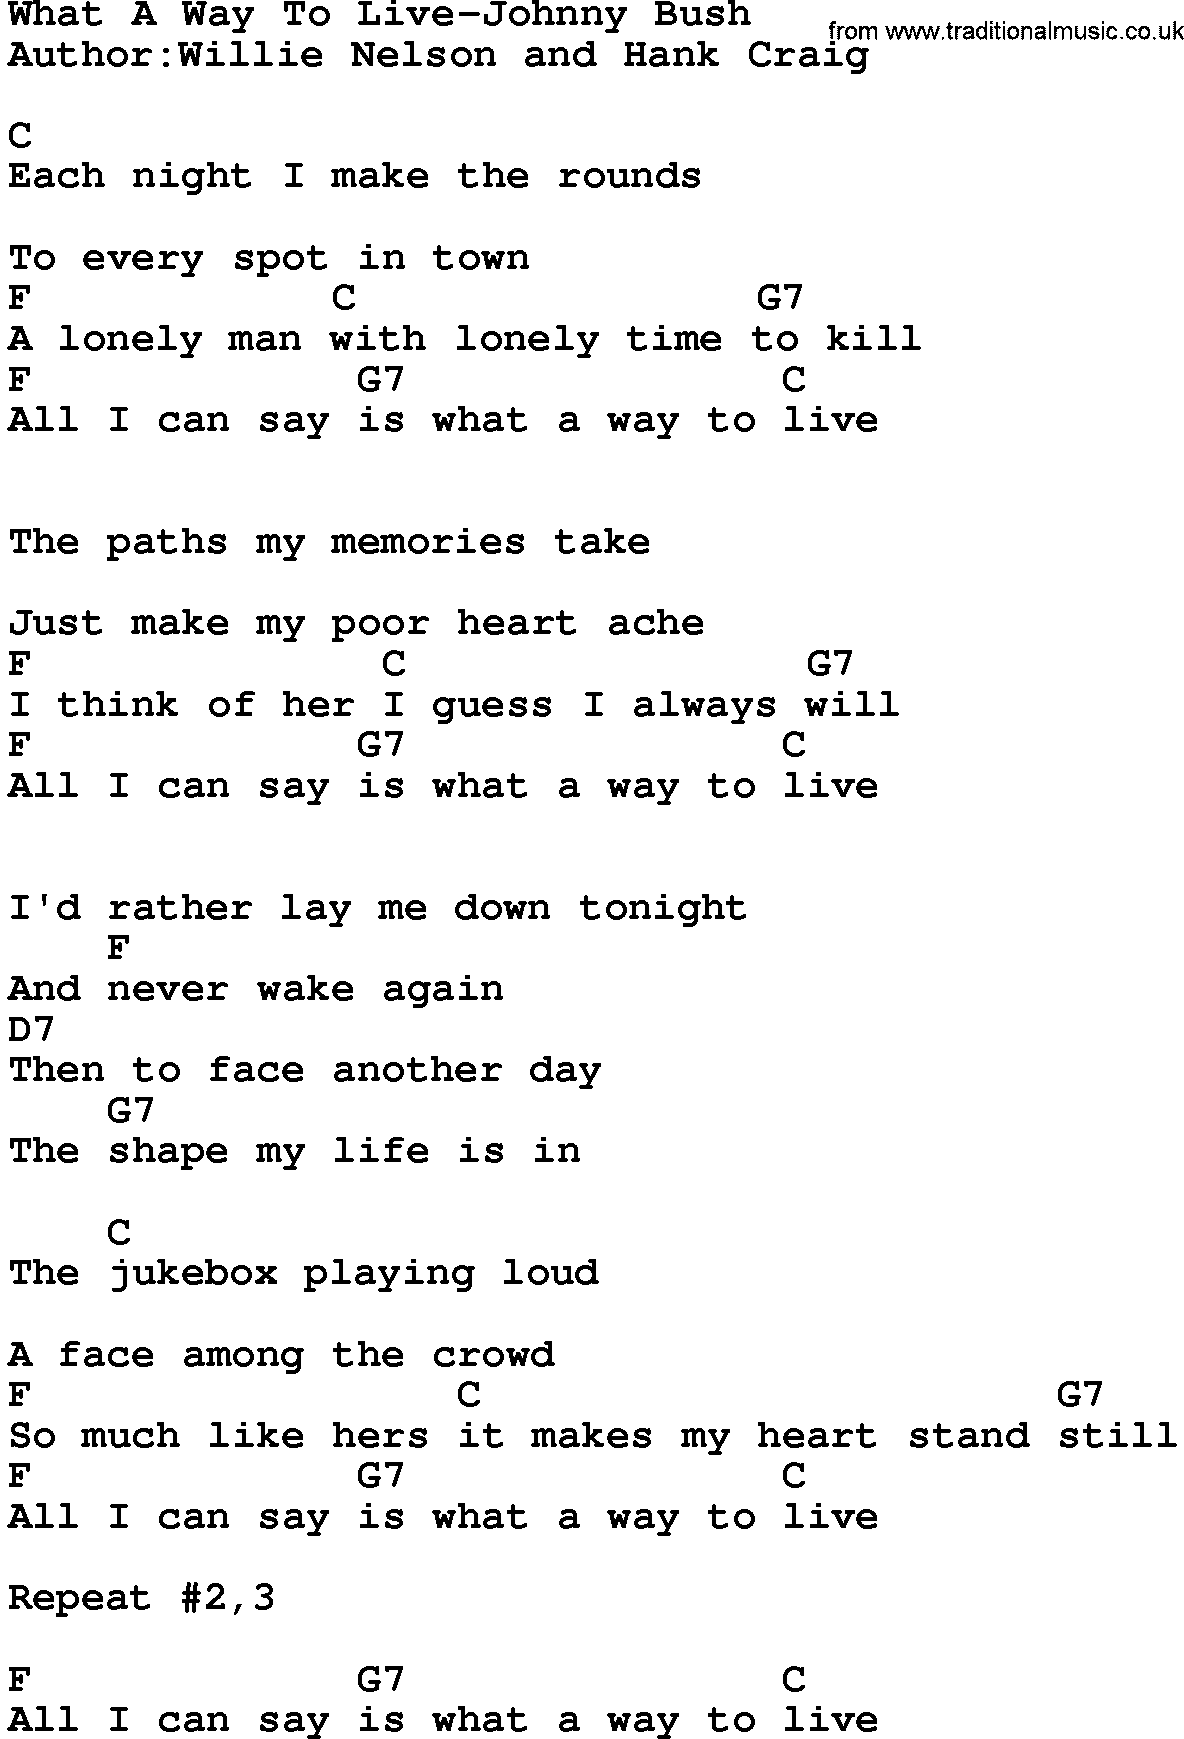 Country music song: What A Way To Live-Johnny Bush lyrics and chords